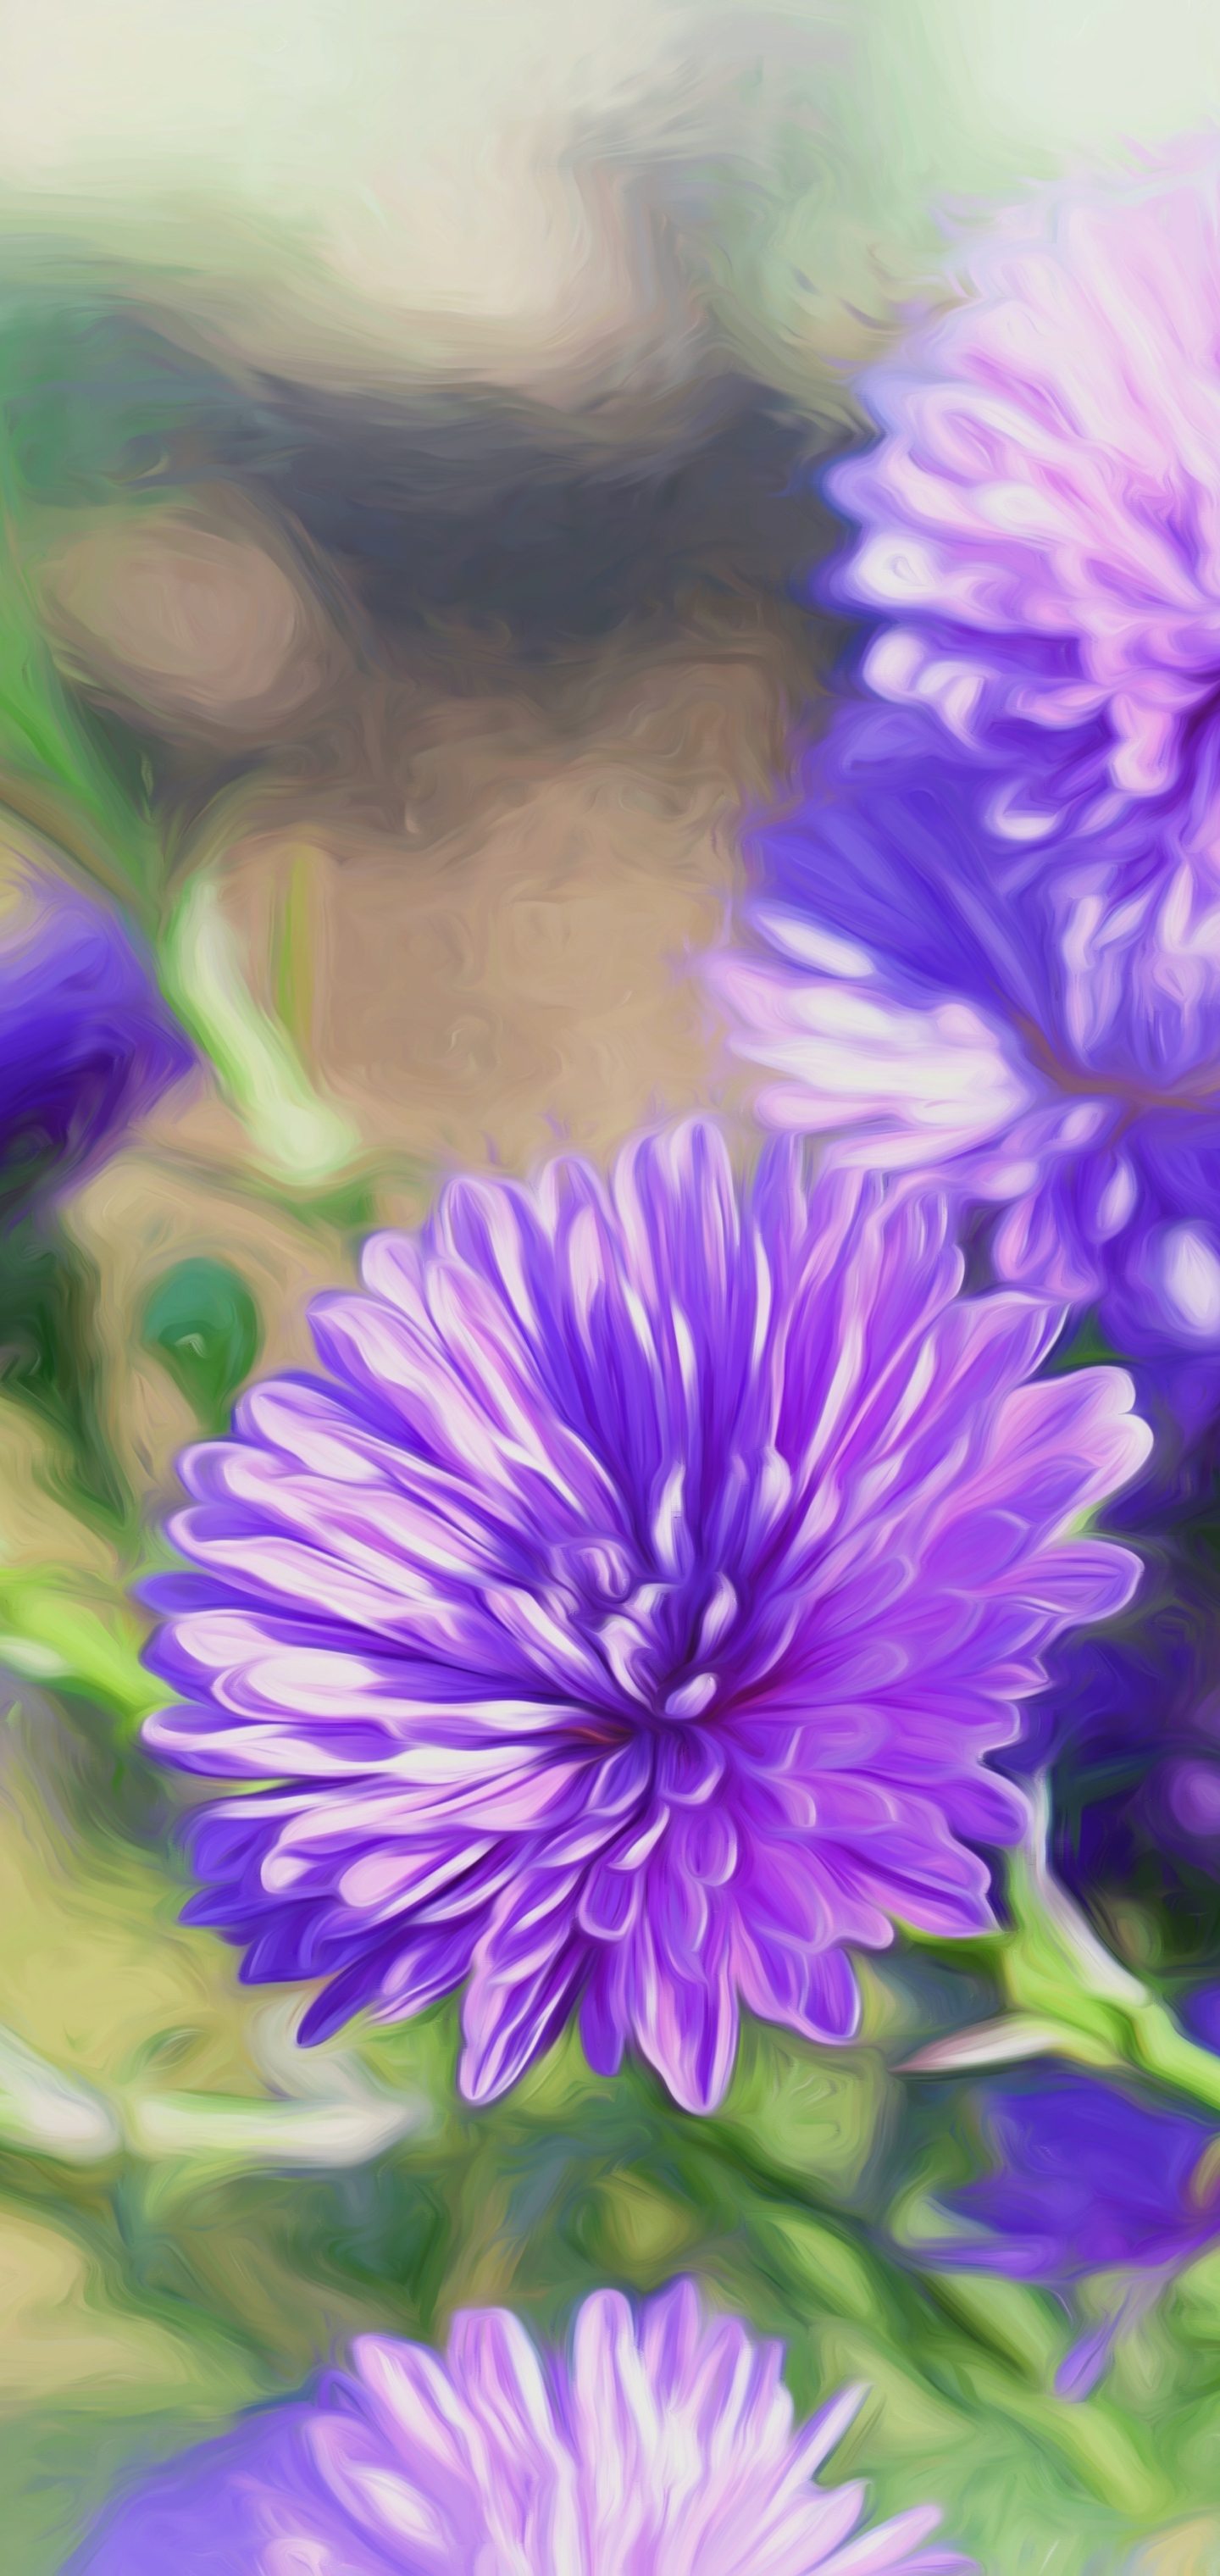 Daisy (Aster) done with oil pain filter by Hans Benn